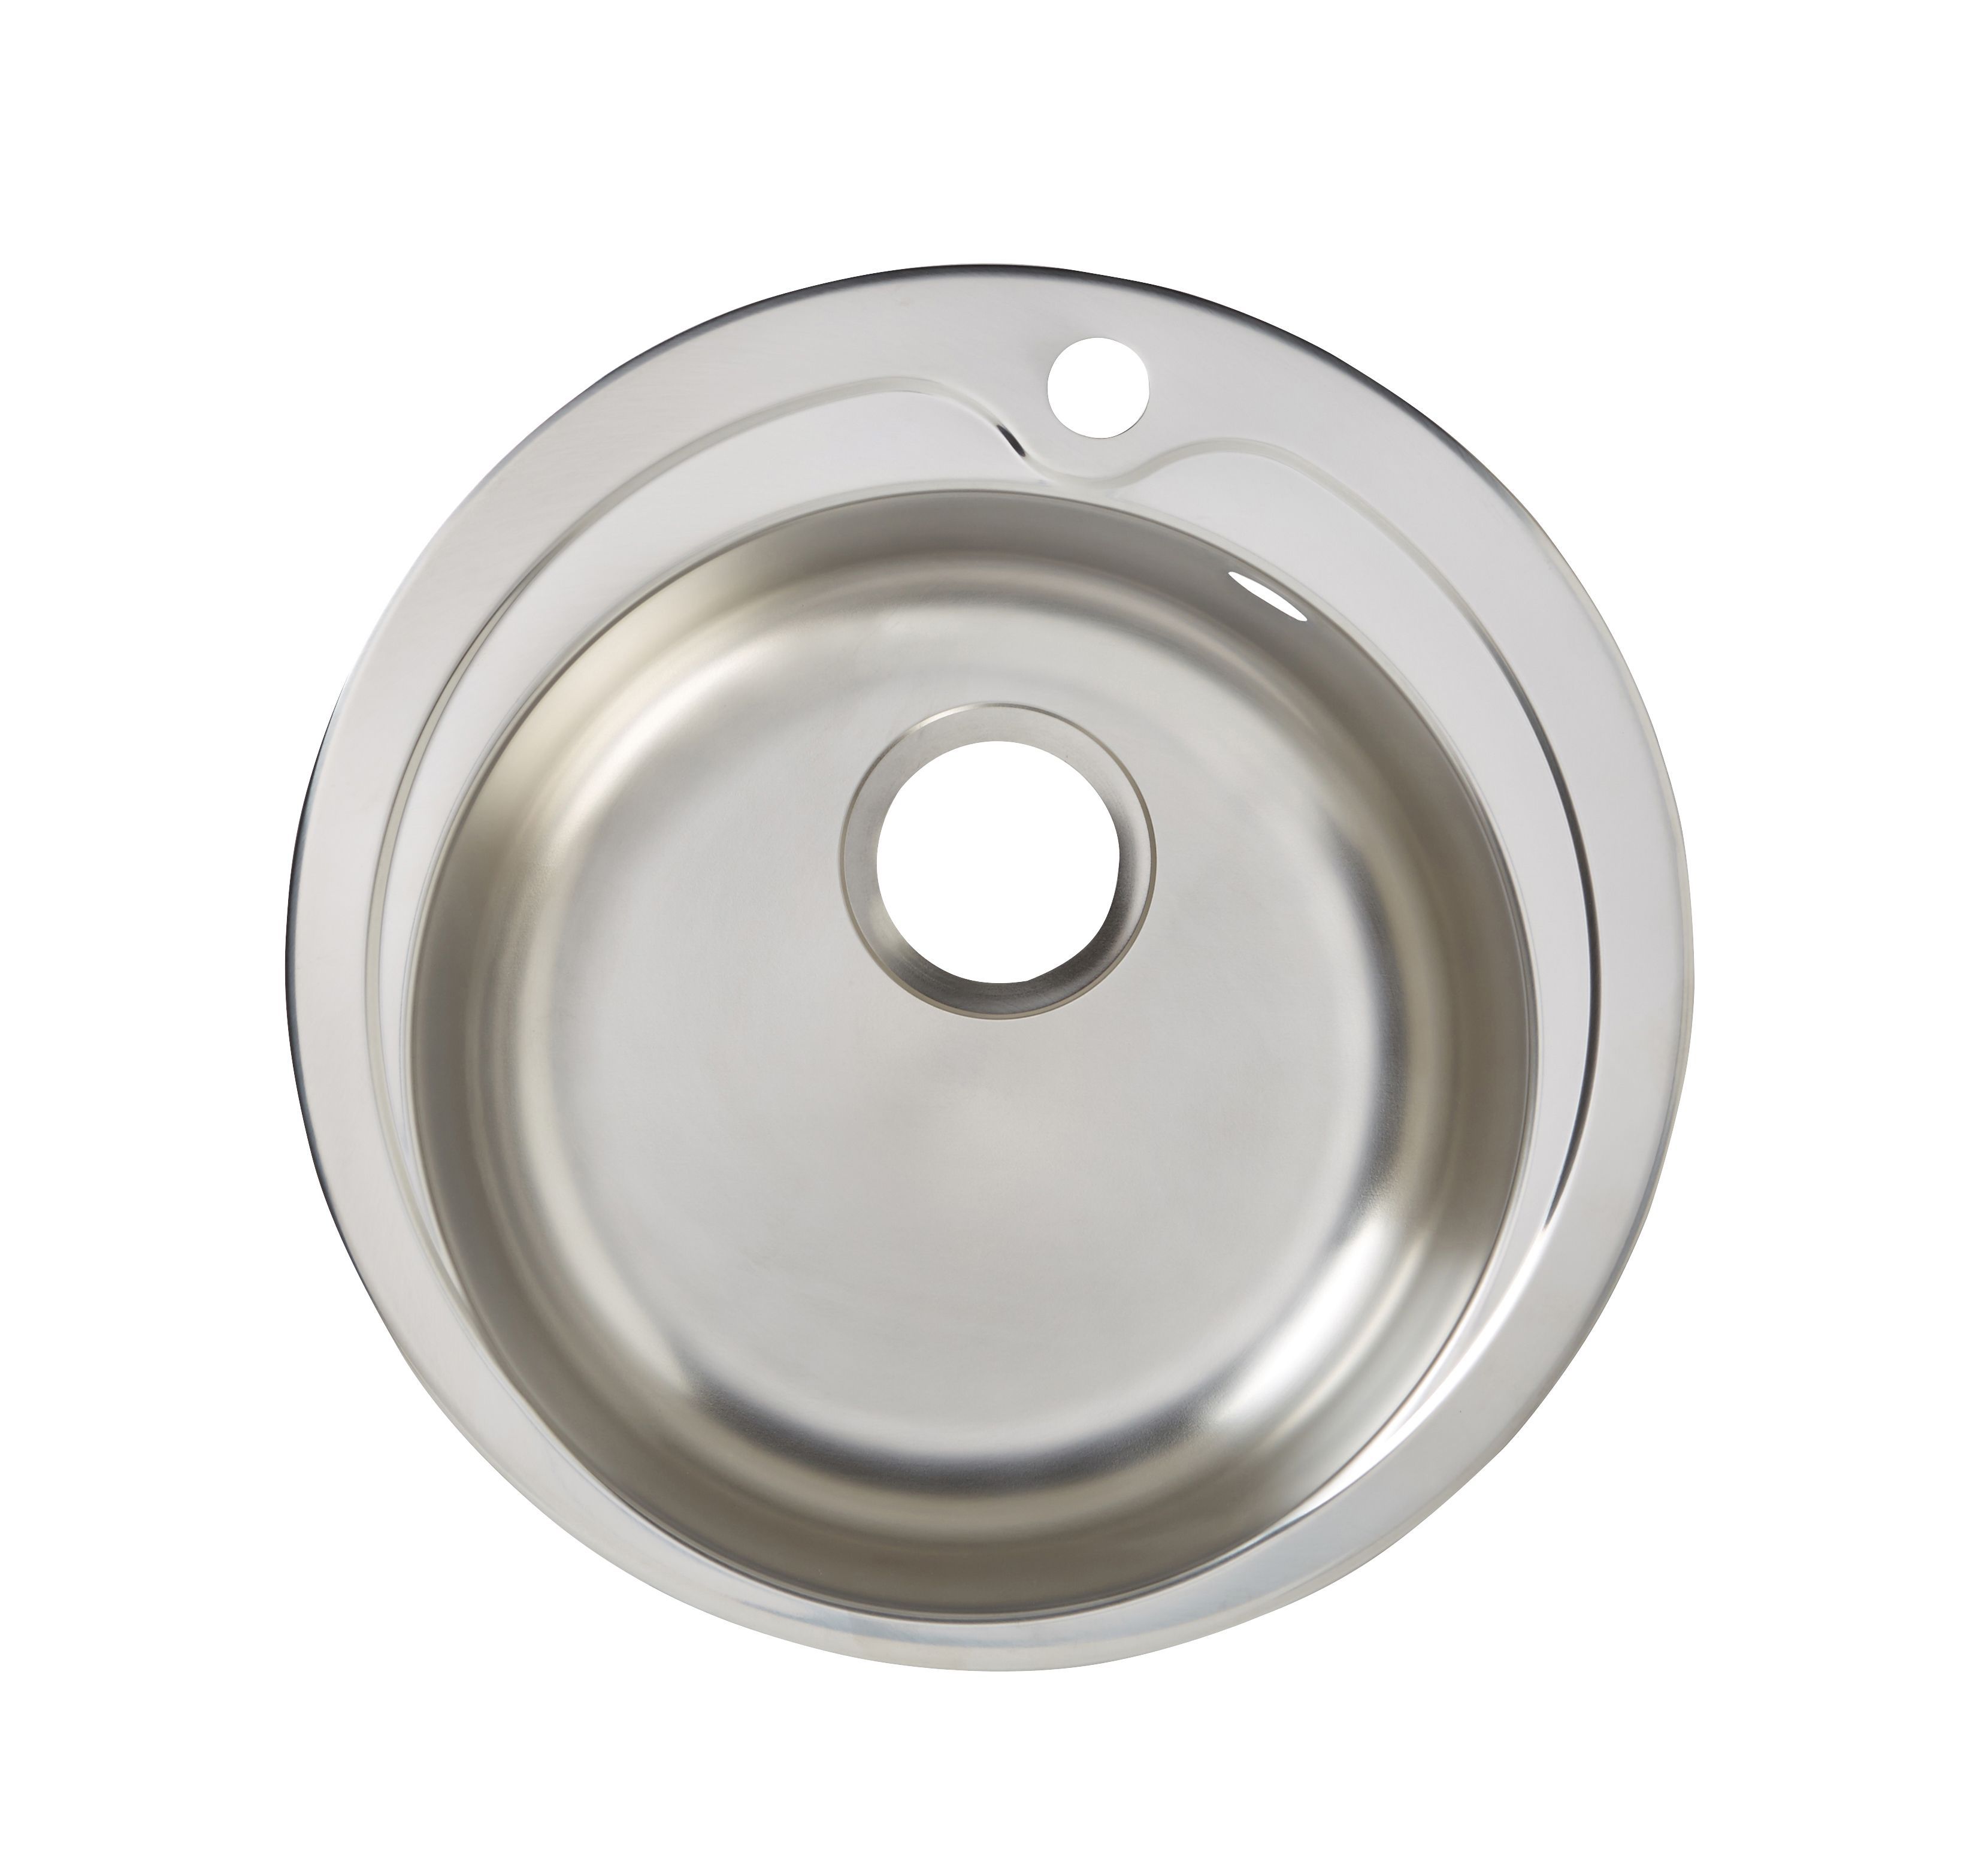 Quimby Inox Stainless steel 1 Bowl Sink 485mm x 485mm